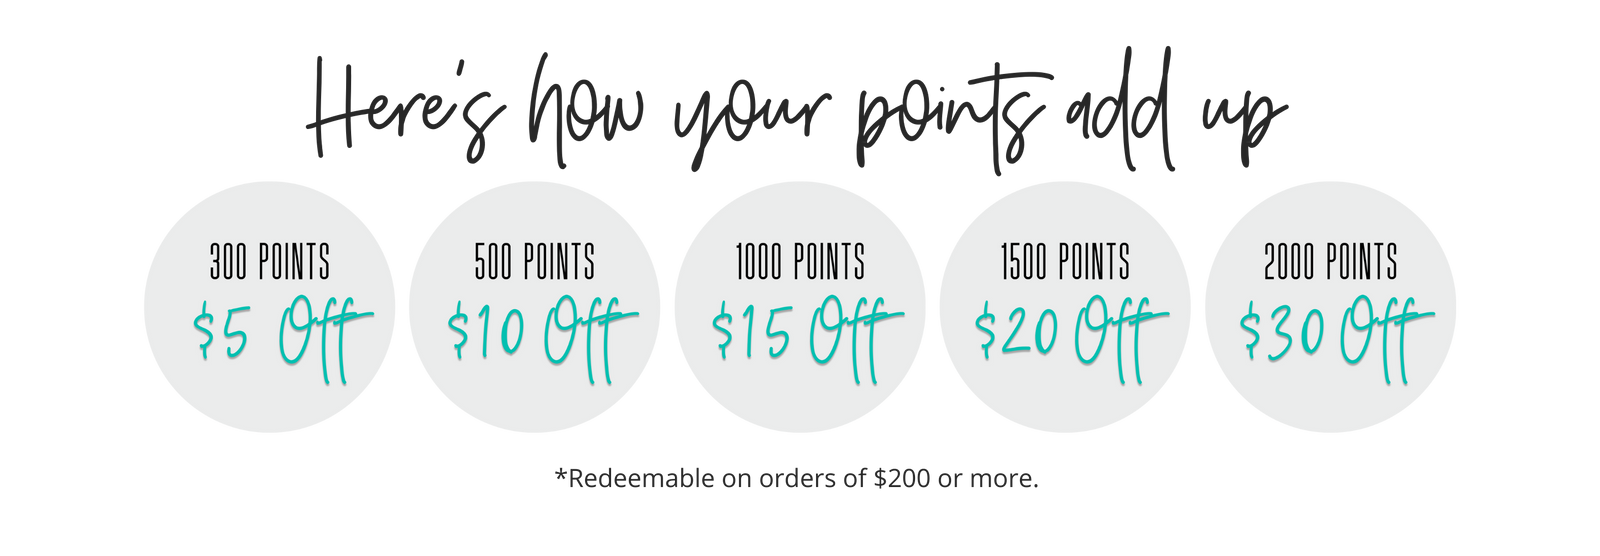 here's how your points add up. 300 points $5 off, 500 points $10 off, 1000 points $15 off, 1500 points $20 off, 2000 points $30 off. *redeemable on orders of $200 or more. 